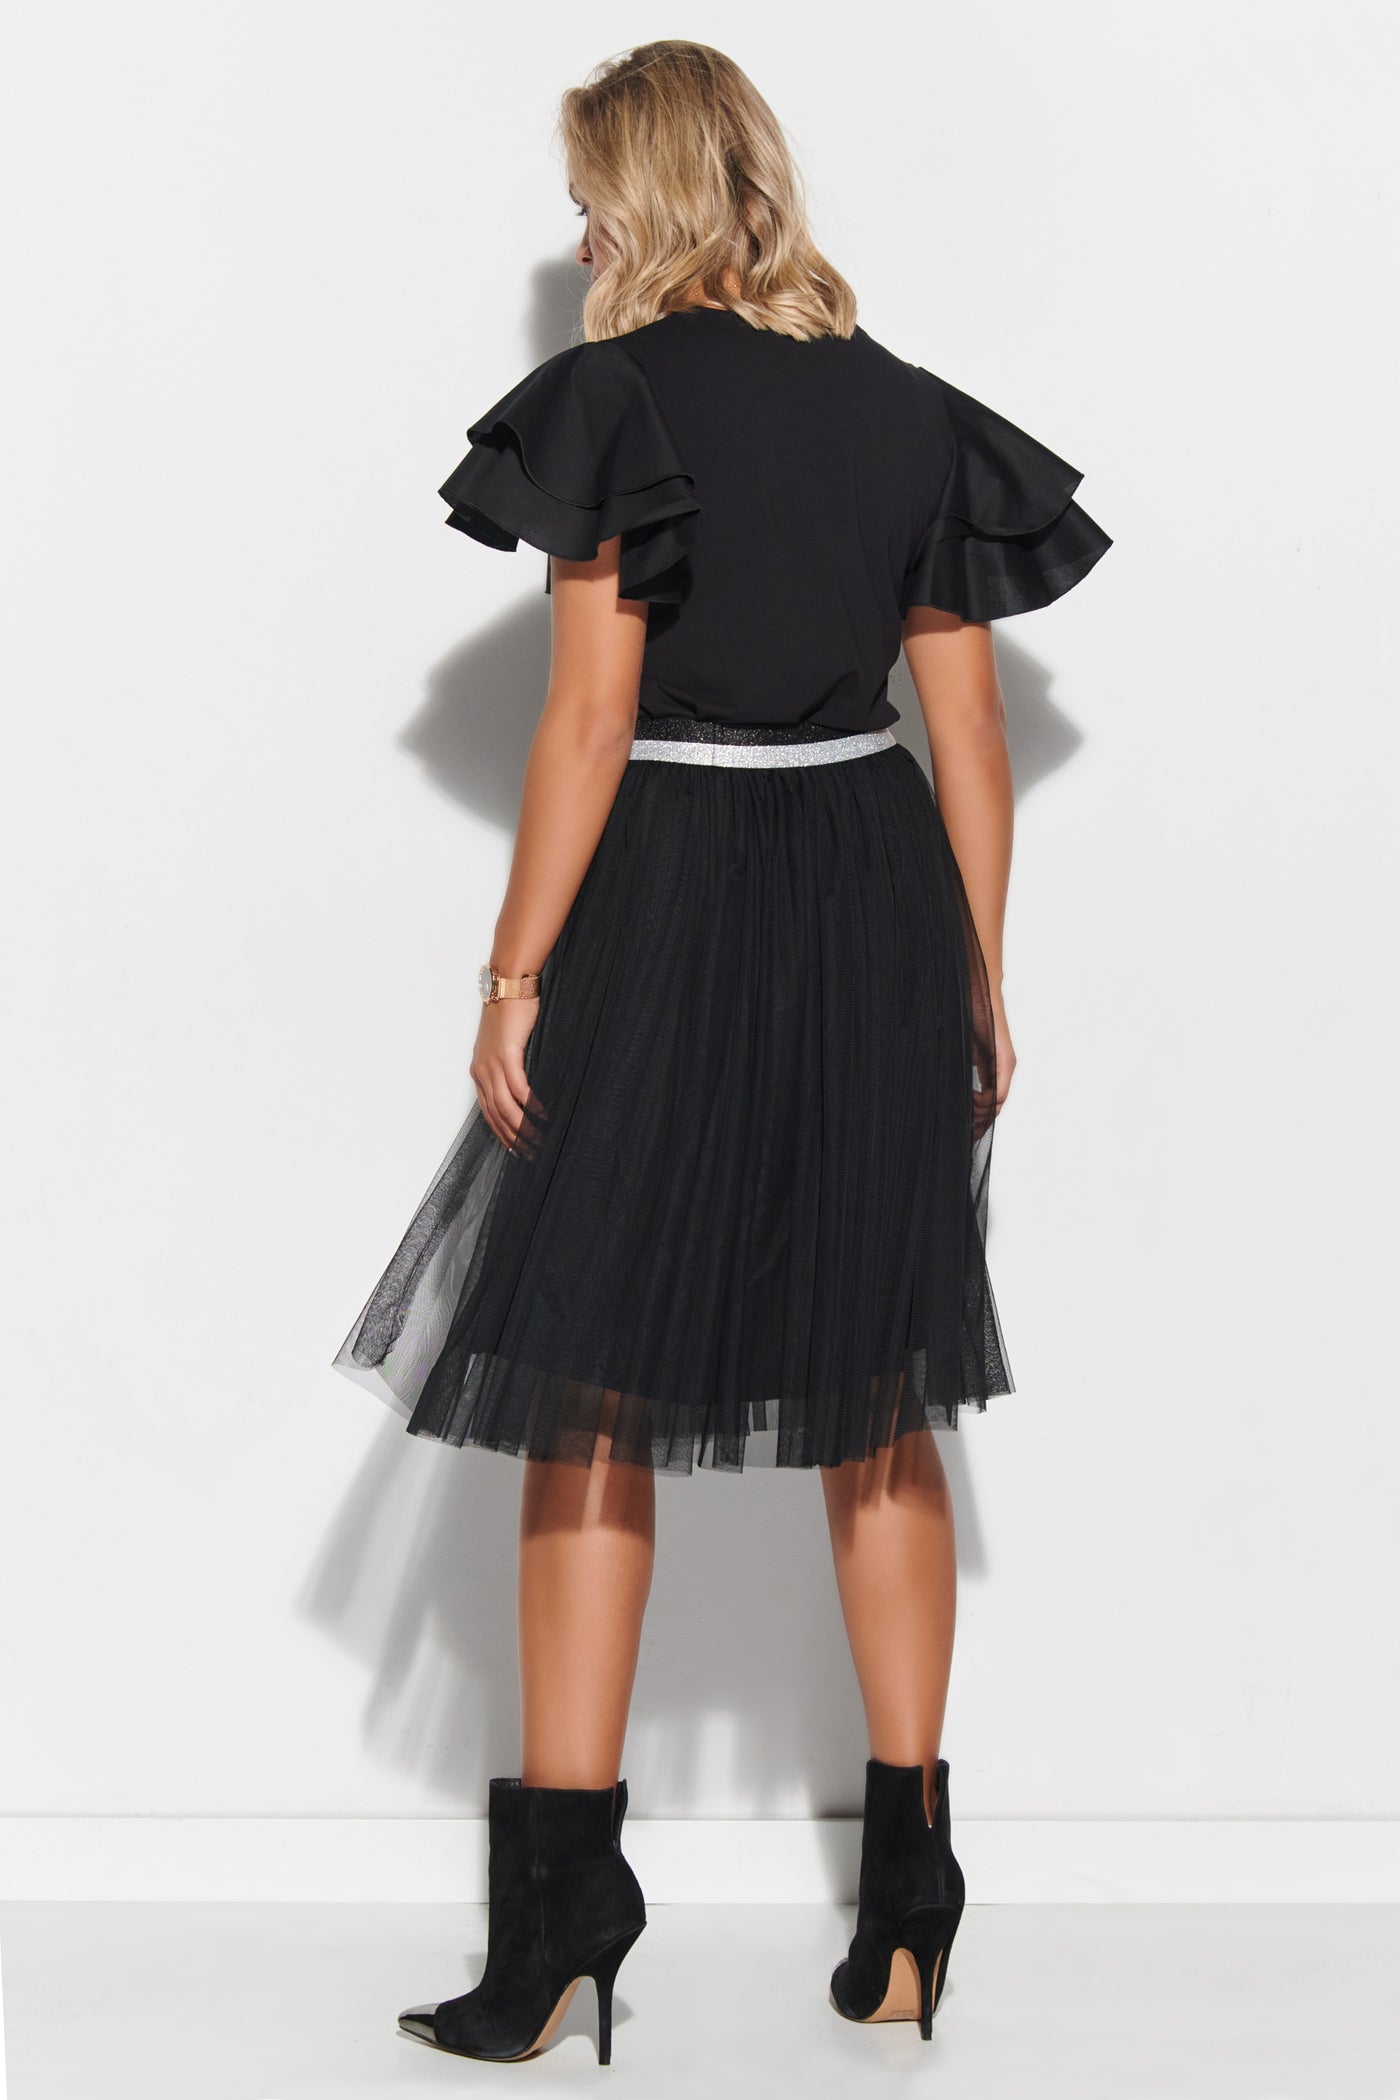 Tulle skirt with black and silver elastic waist